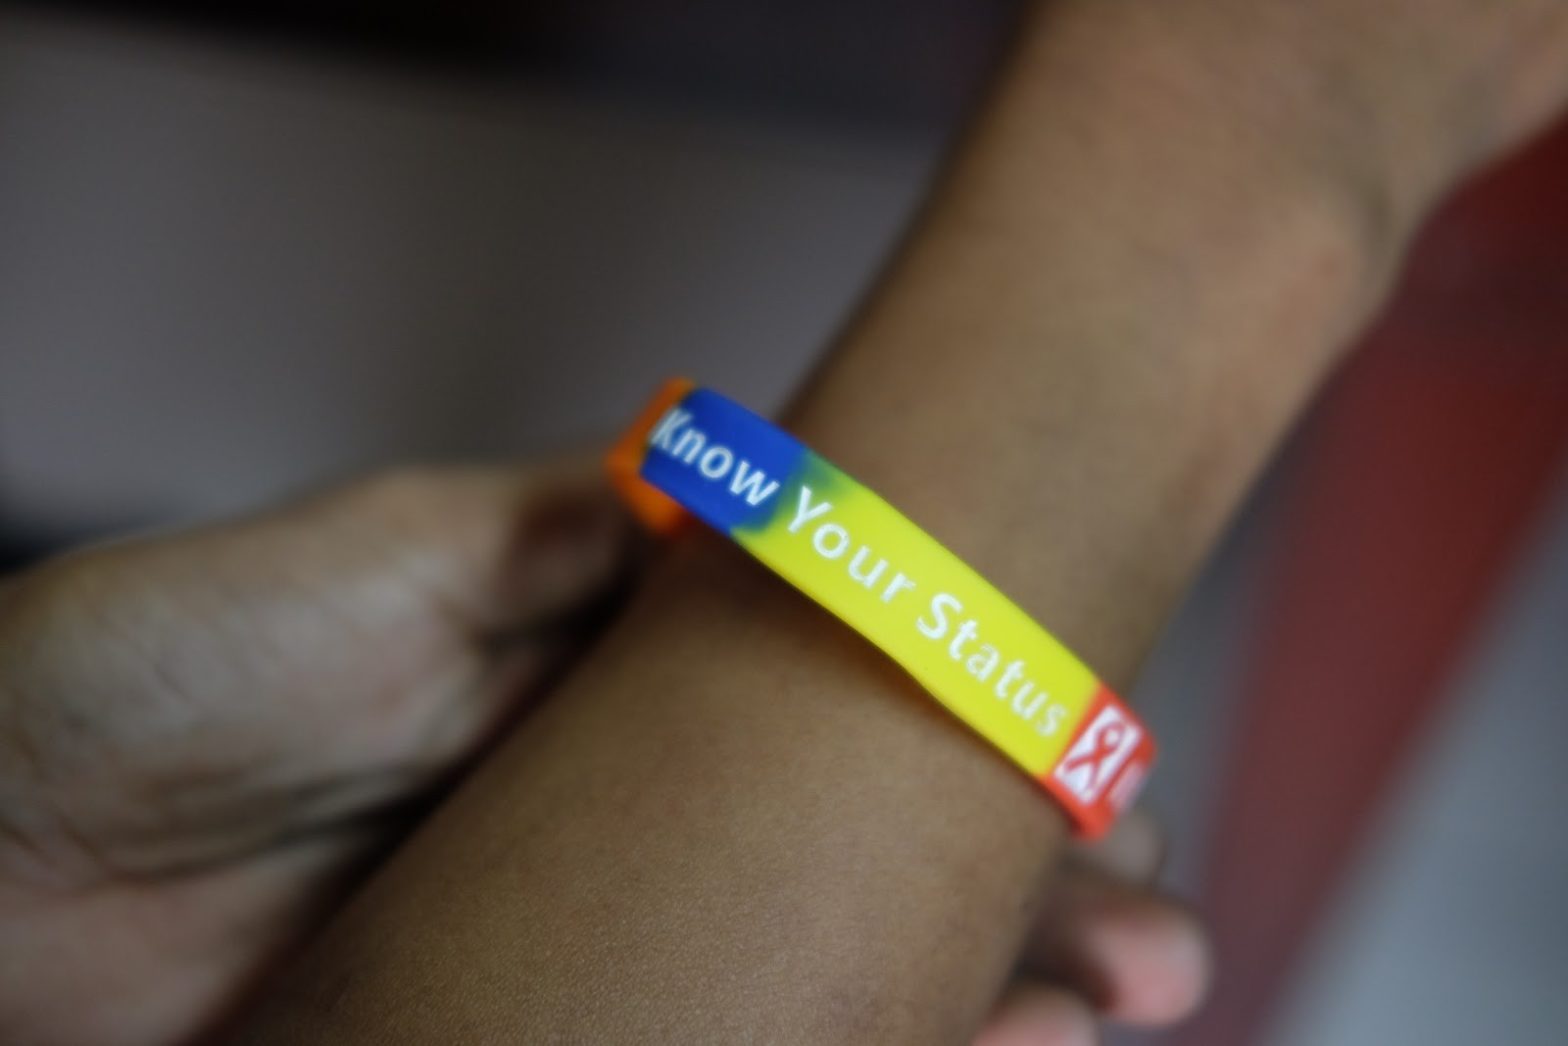 On Peter’s baller is “Know Your Status,” an HIV-related campaign that advocates getting oneself regularly checked. These are one of the many ballers he distributes during his advocacy work with the Quezon City Health Department.